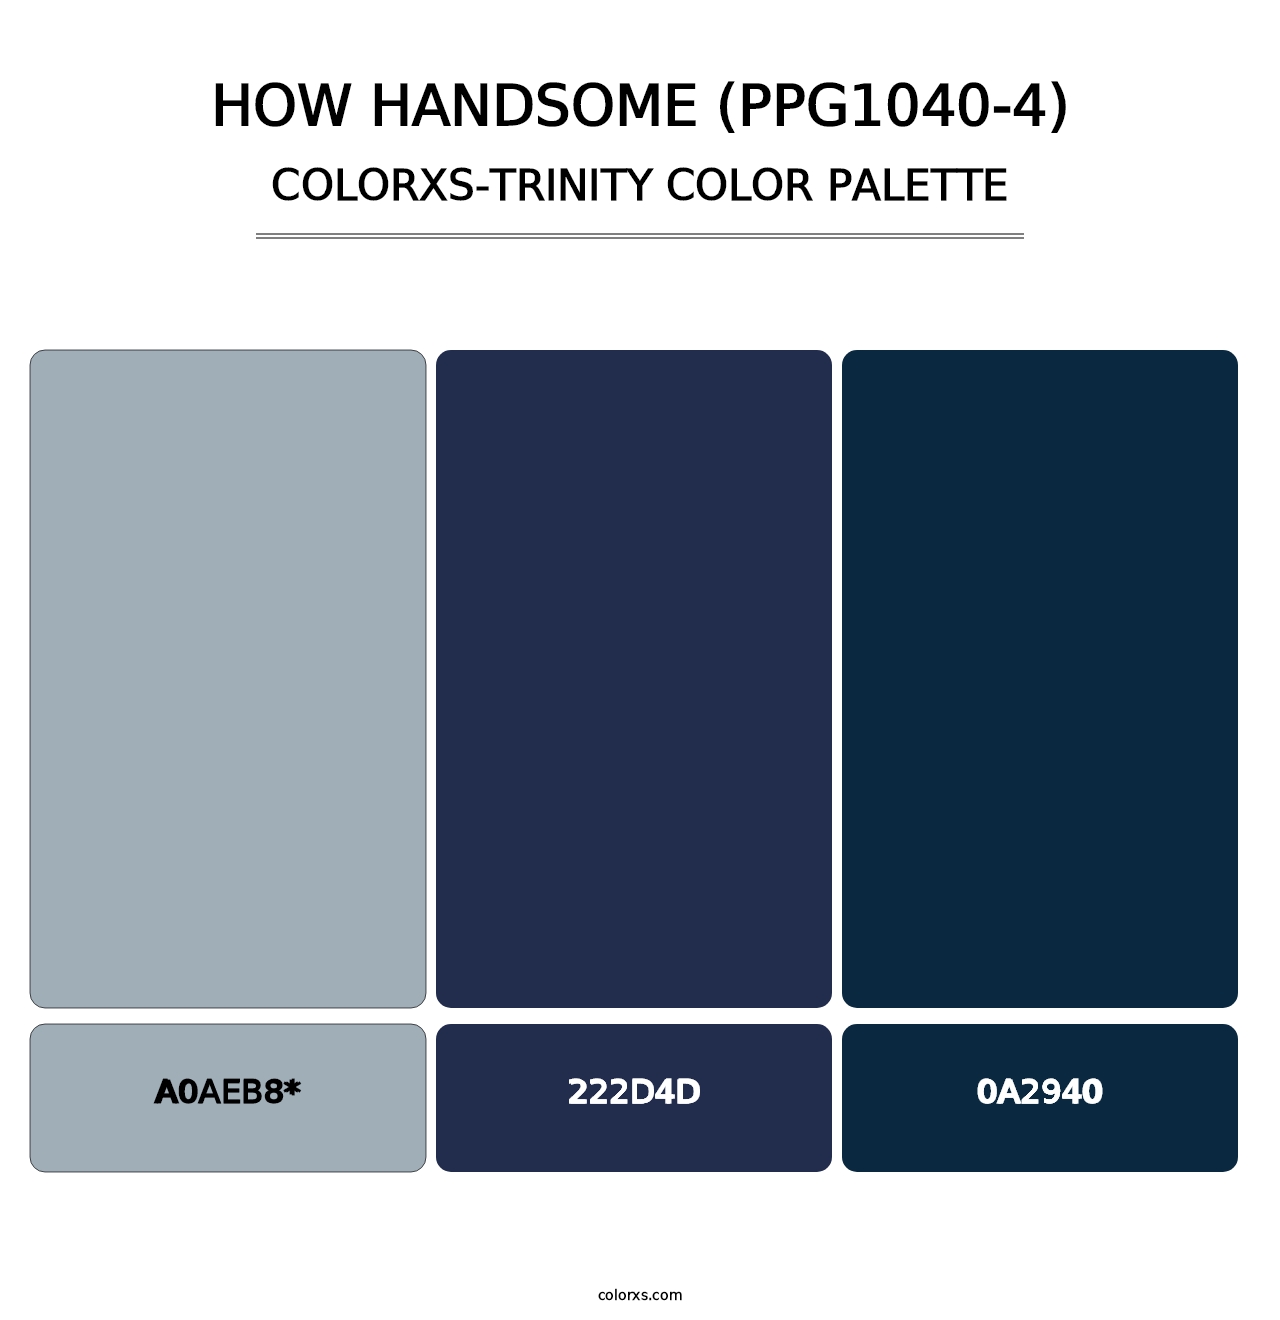 How Handsome (PPG1040-4) - Colorxs Trinity Palette